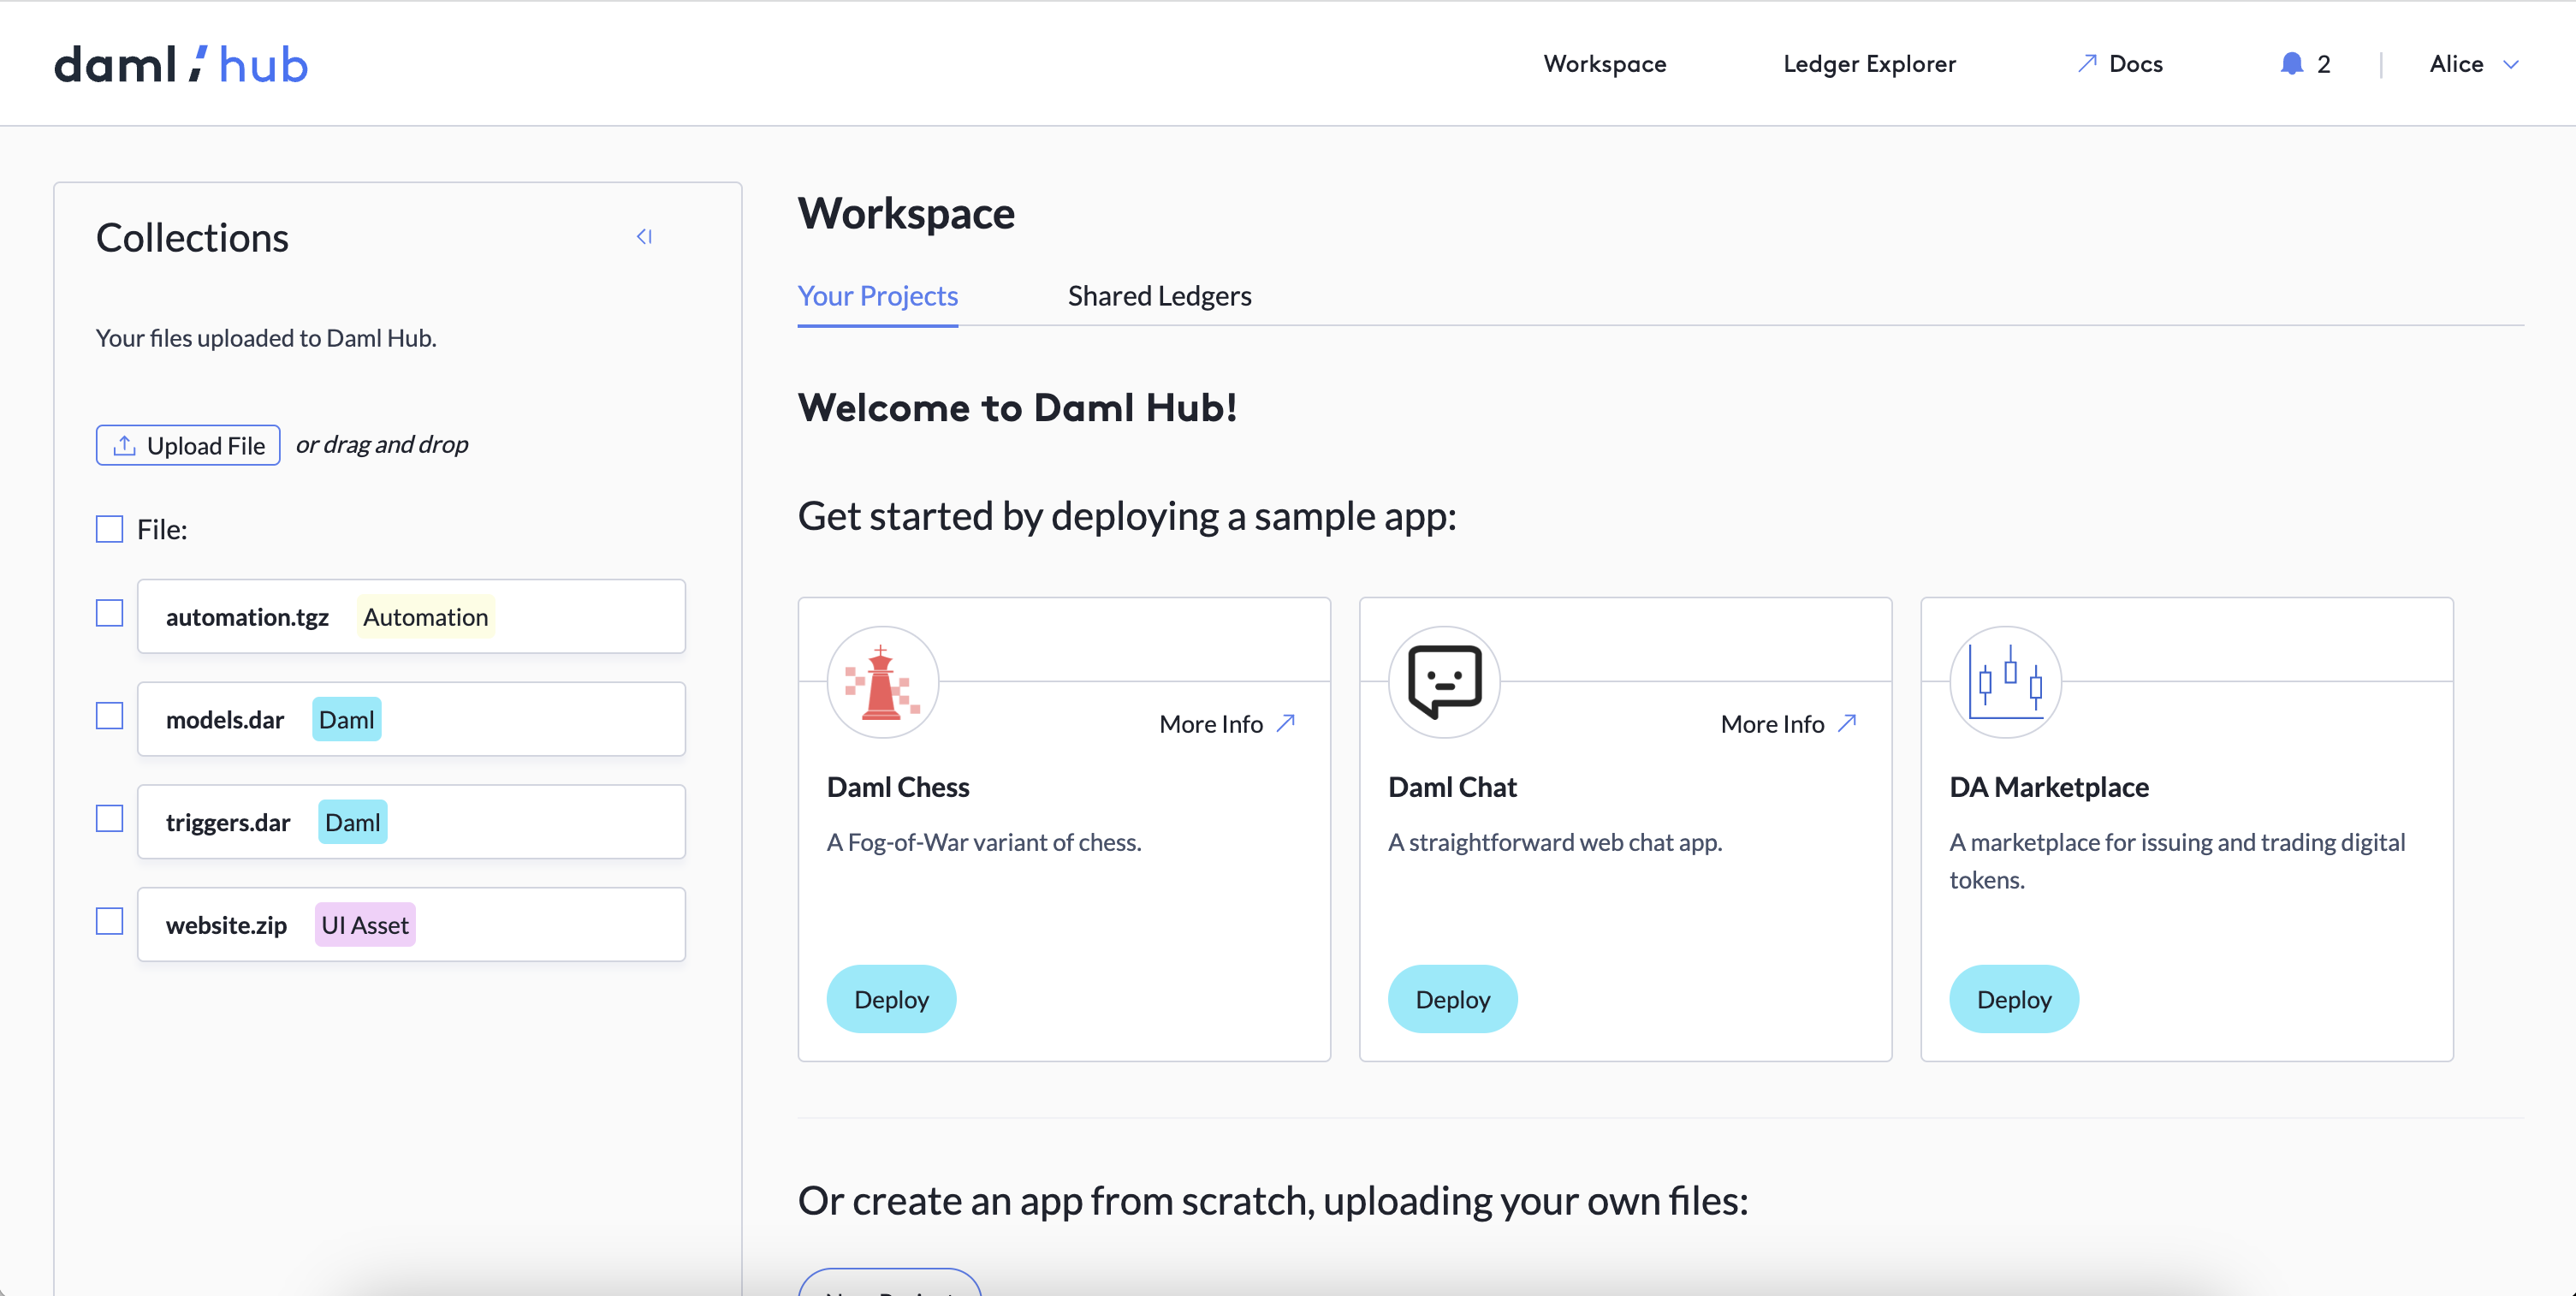 The workspace in the Daml Hub UI, focused in the Your Projects zone, with the Welcome to Daml Hub! message and sample apps.